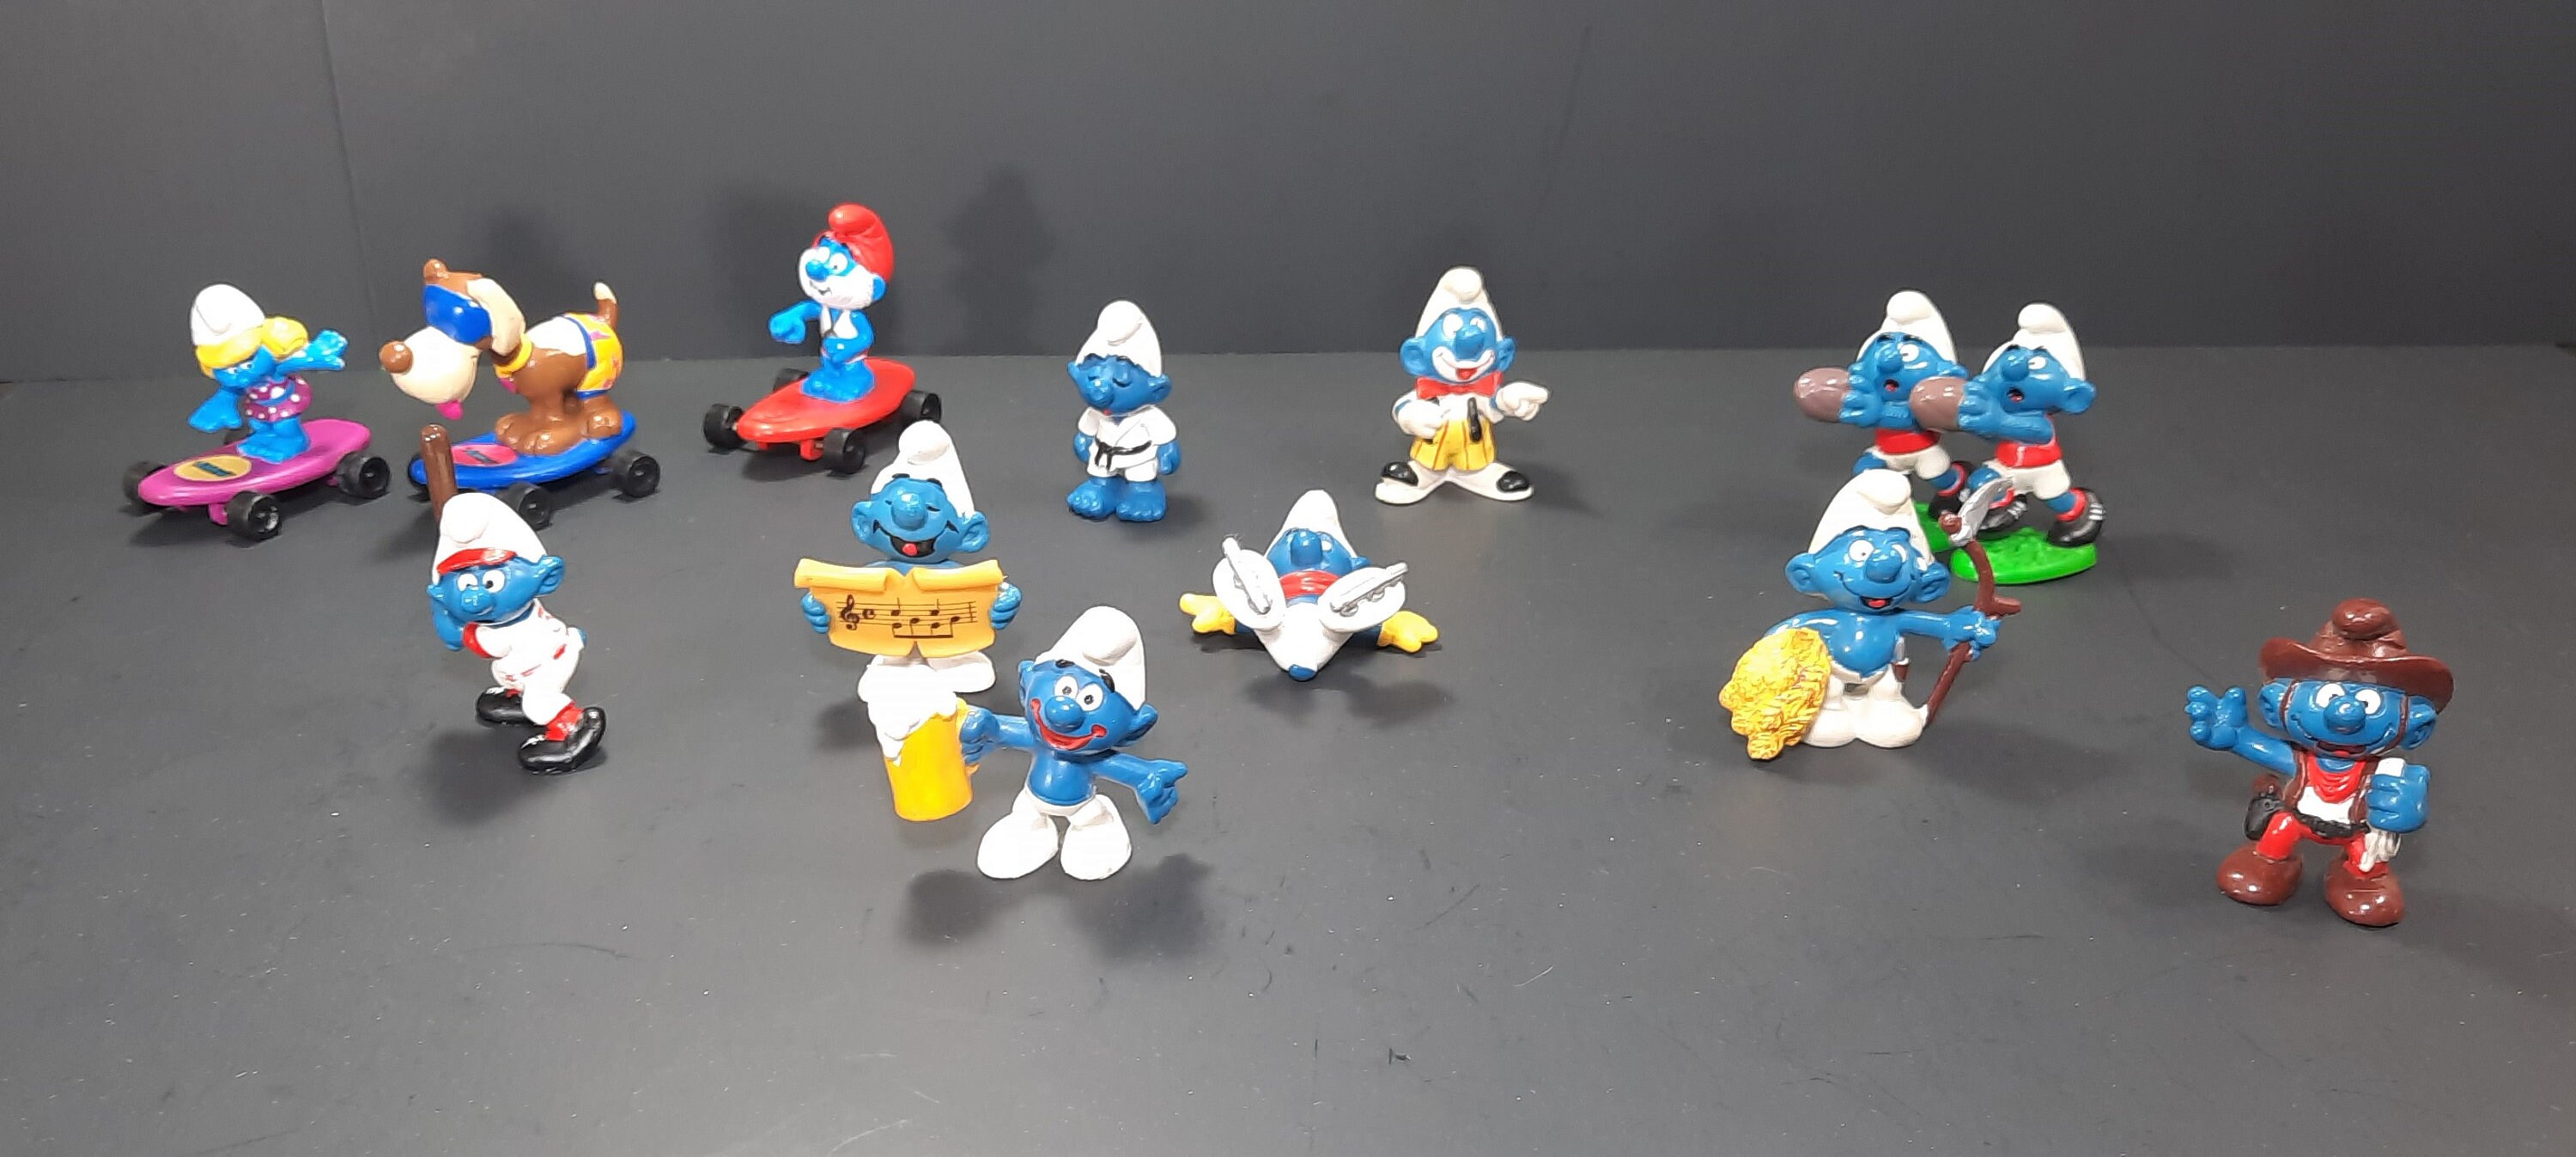 Vintage Toys, Collectible, SMURFS 1990, FOOTBALL Smurfs, Complete